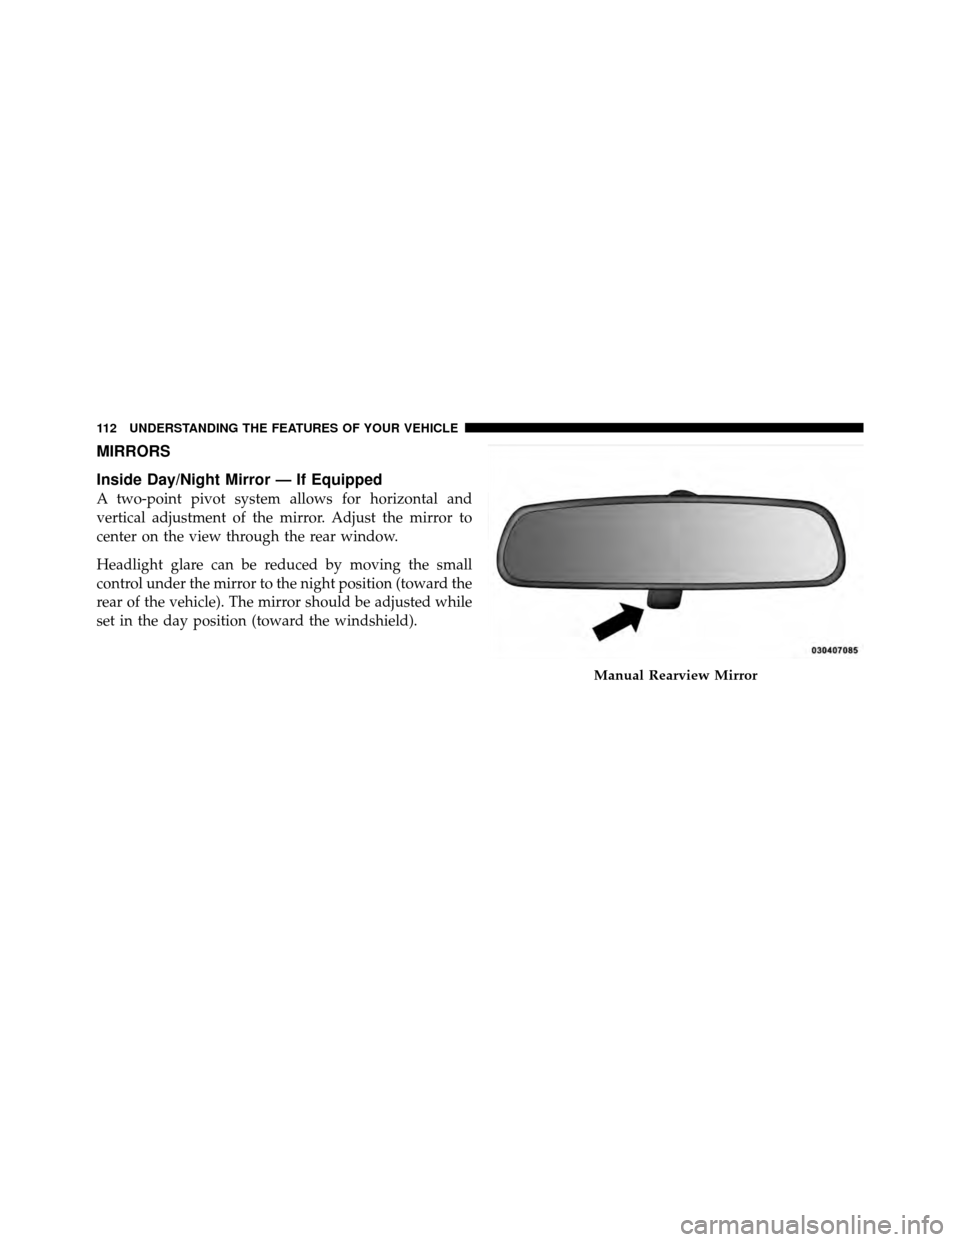 CHRYSLER TOWN AND COUNTRY 2010 5.G Owners Manual MIRRORS
Inside Day/Night Mirror — If Equipped
A two-point pivot system allows for horizontal and
vertical adjustment of the mirror. Adjust the mirror to
center on the view through the rear window.
H